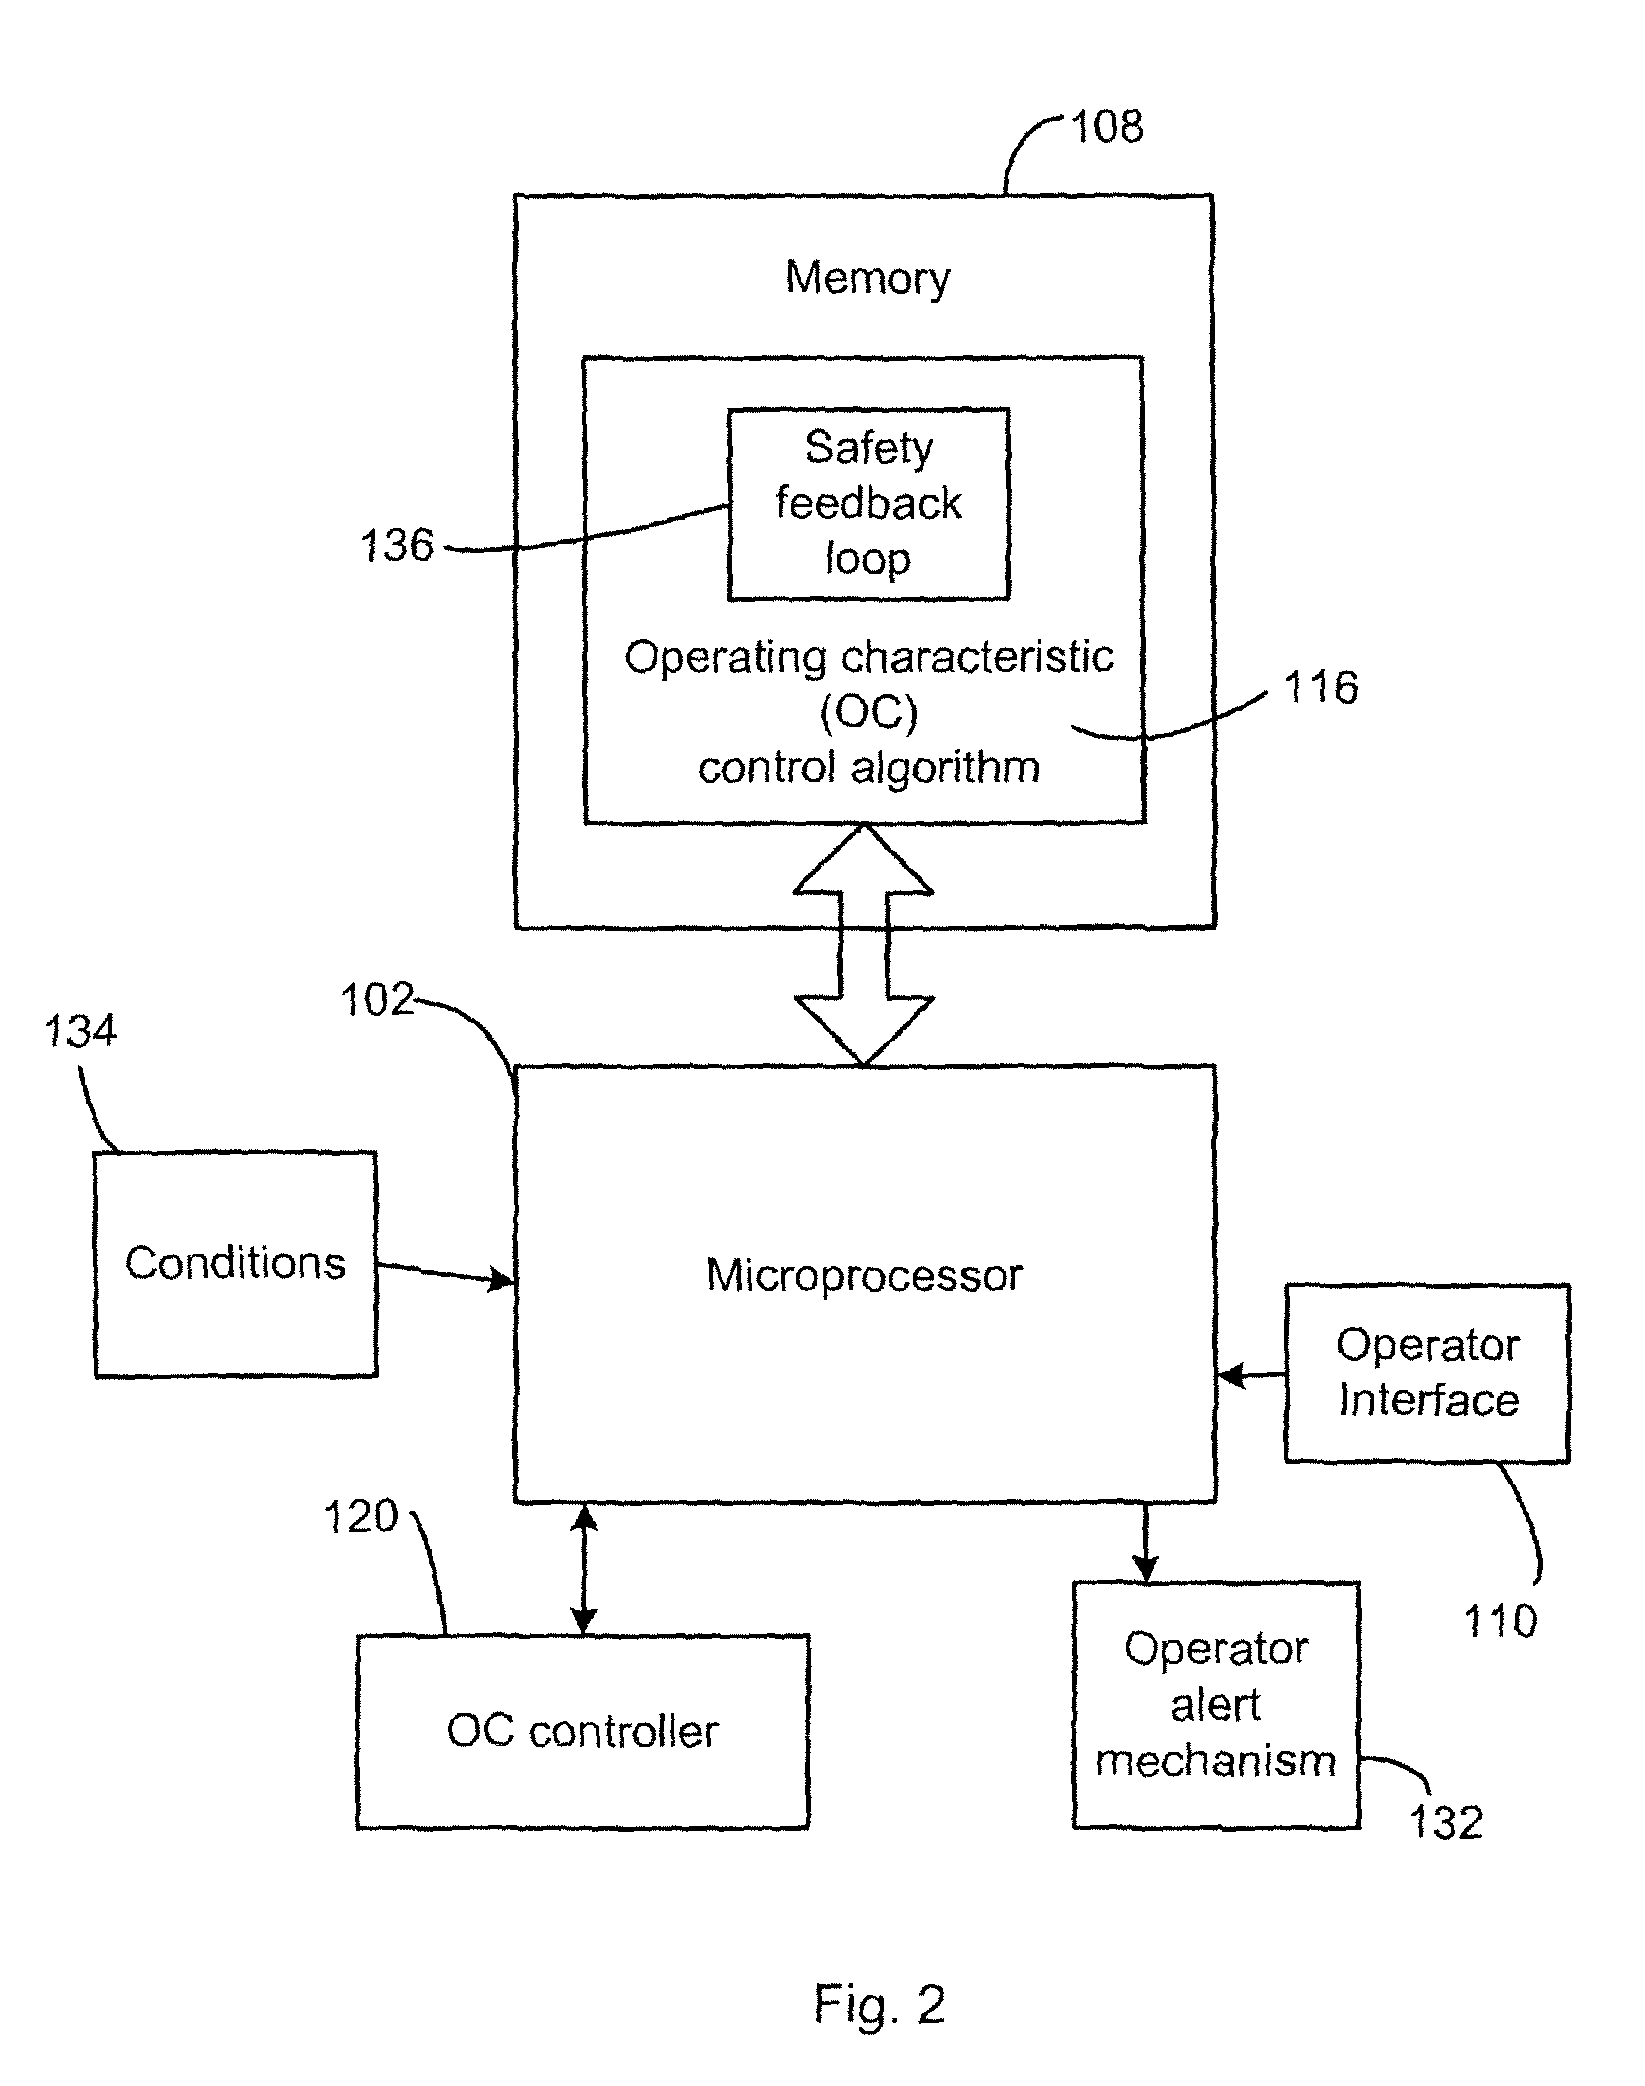 Tip-based computer controlled system for a hand-held dental delivery device